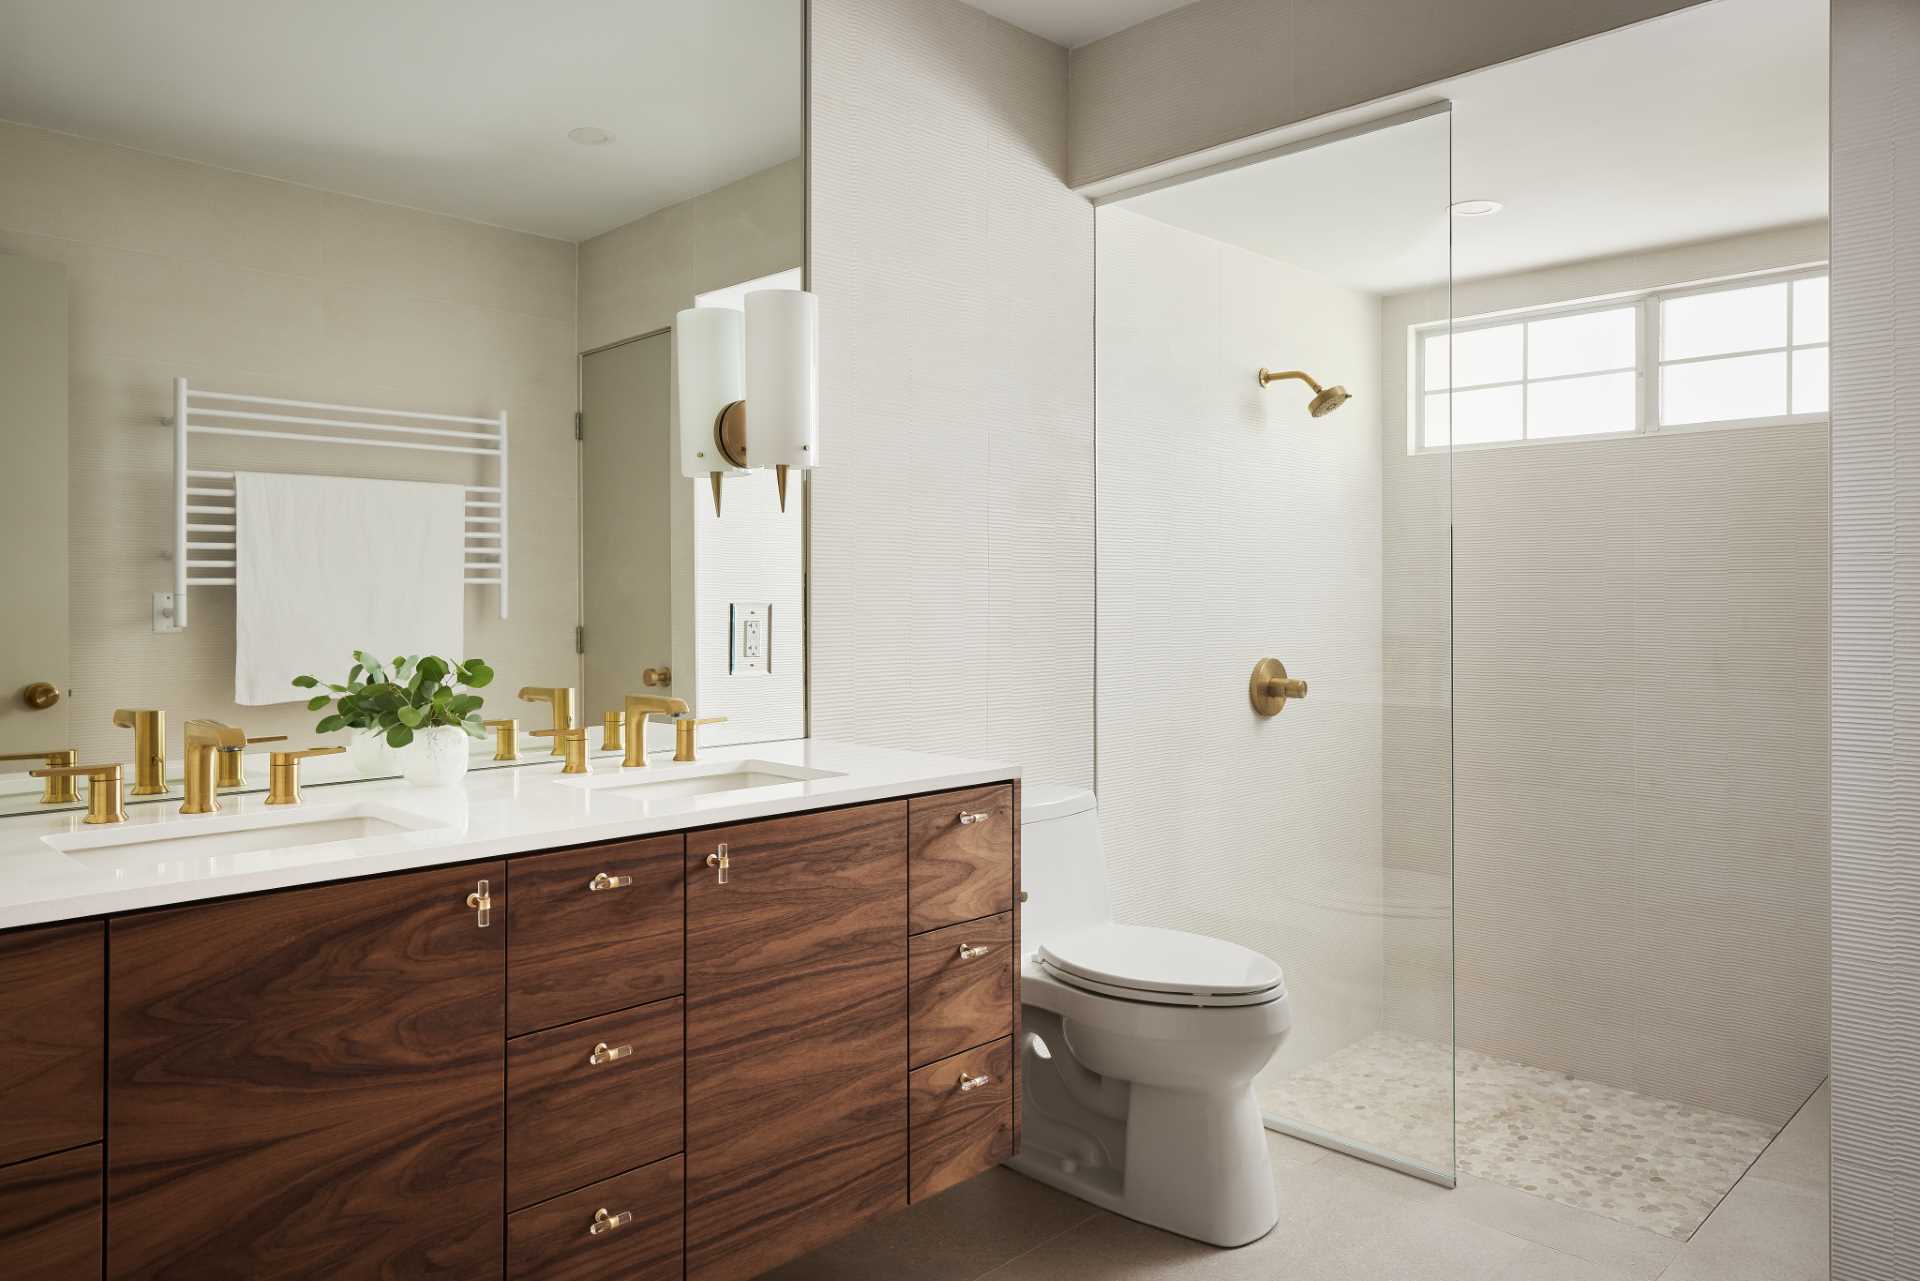 AFTER - This updated main bathroom has a sense of sophistication, with a double vanity with walnut cabinetry, metallic hardware, and a large mirror. In the shower, the glass block wall has been replaced with a solid wall, and the shower curtain has been replaced by a glass shower screen.